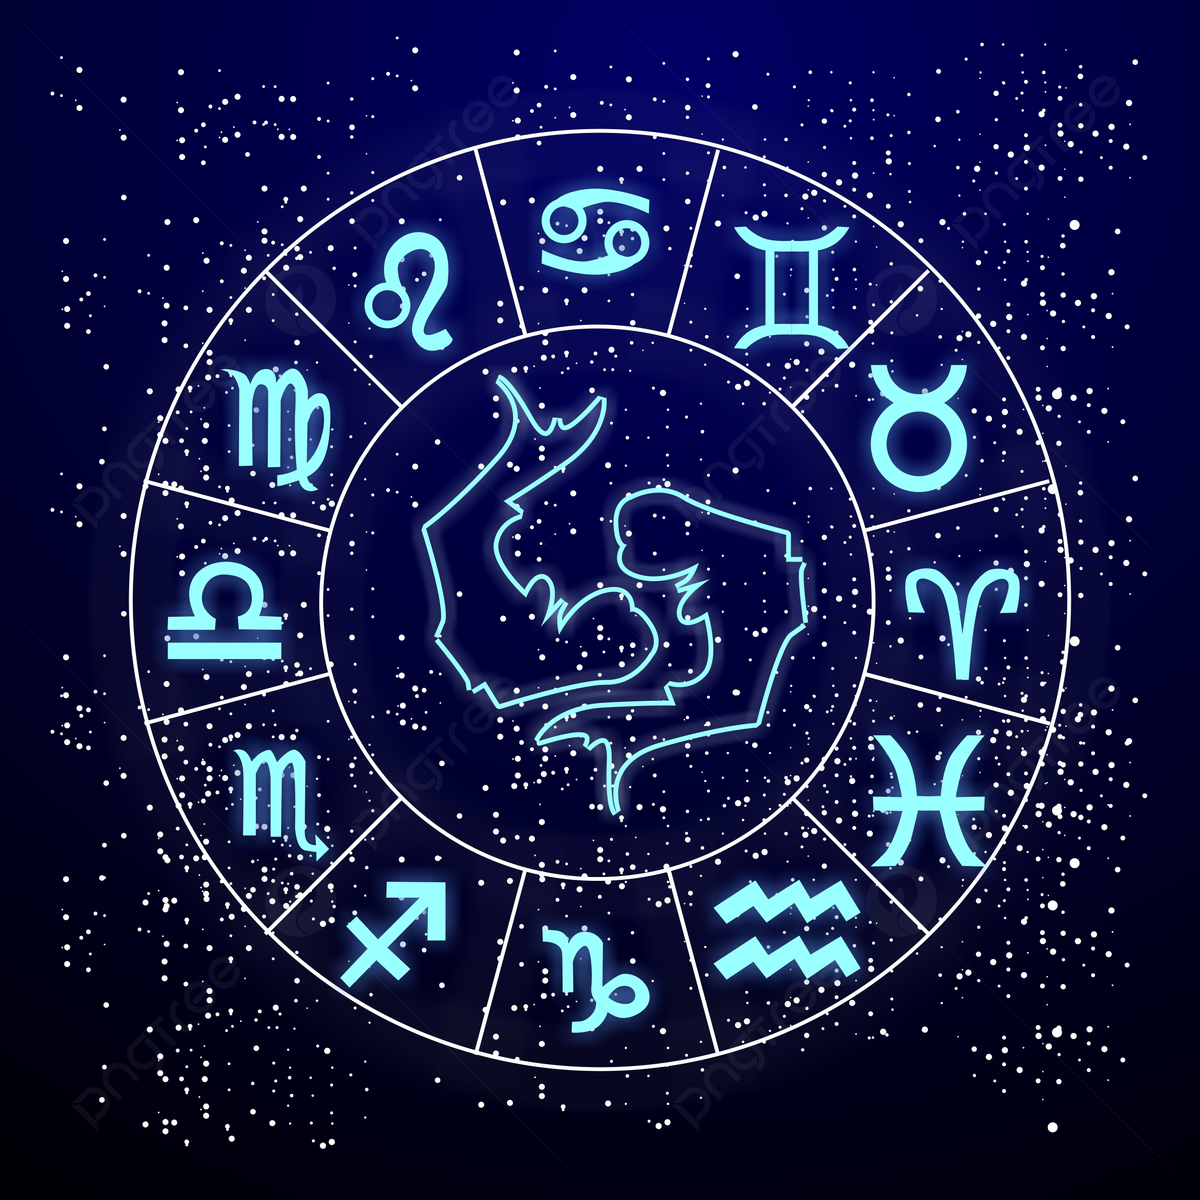 Pisces Constellation Zodiac Horoscope Background, Cosmos, Connected, Galaxy Background Image for Free Download